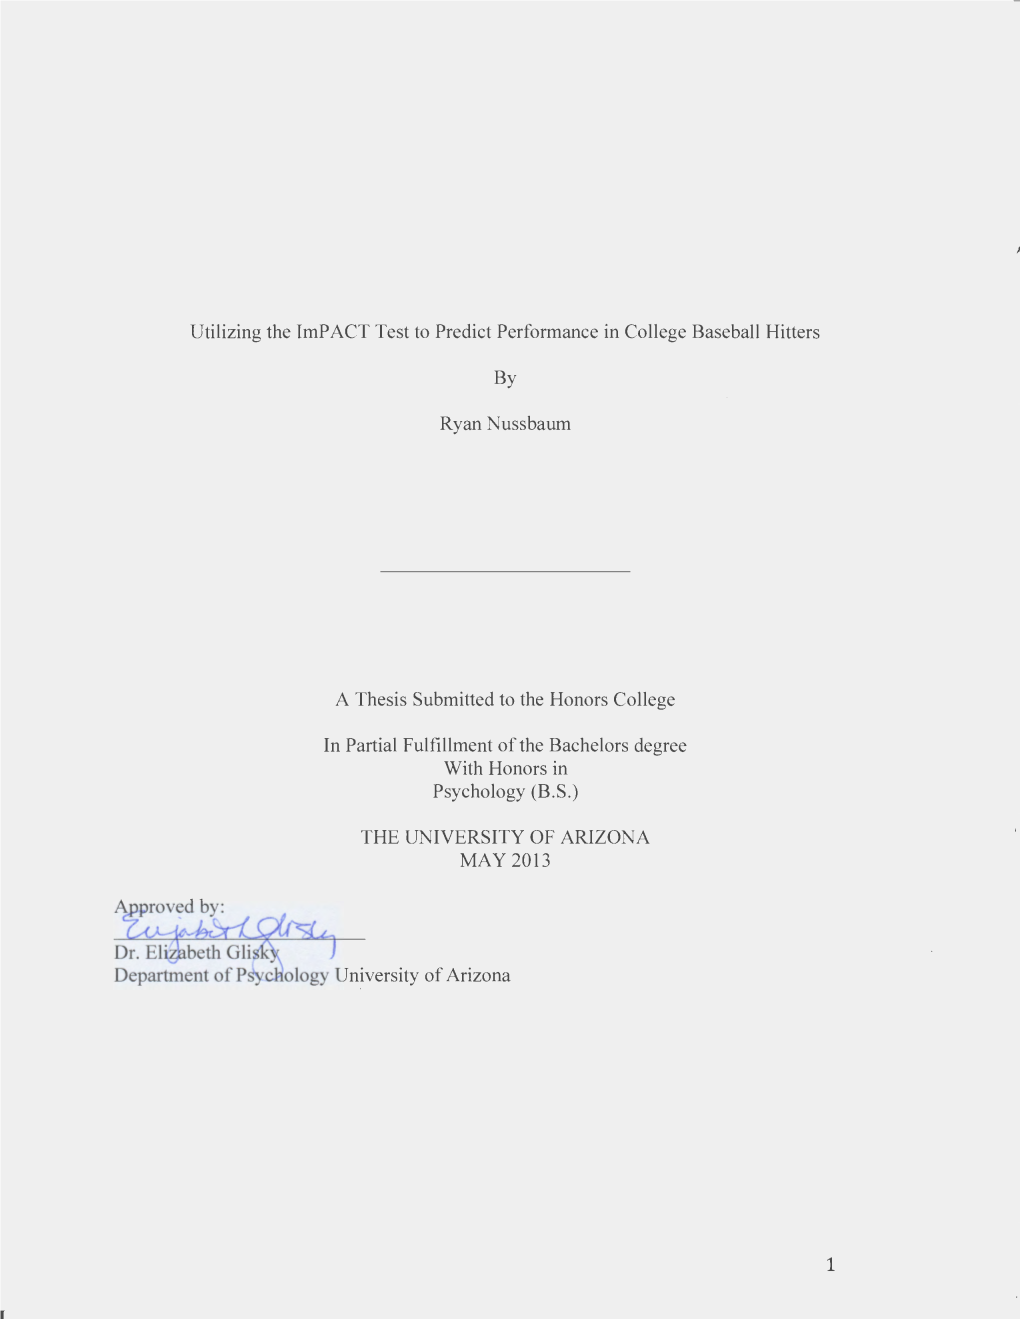 Utilizing the Impact Test to Predict Performance in College Baseball Hitters by Ryan Nussbaum a Thesis Submitted to the Honors C